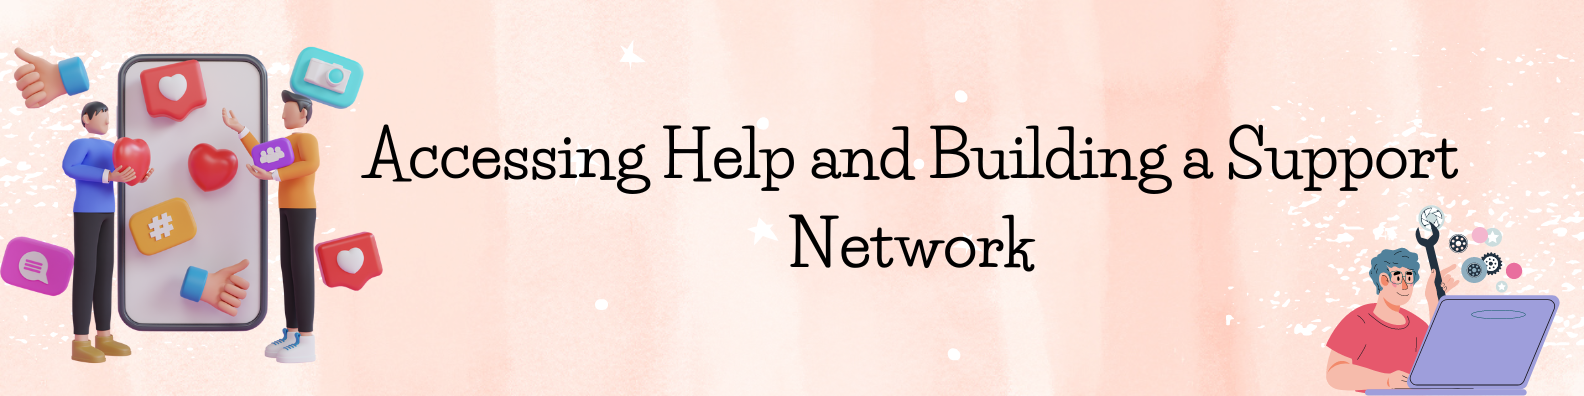 Accessing Help and Building a Support Network